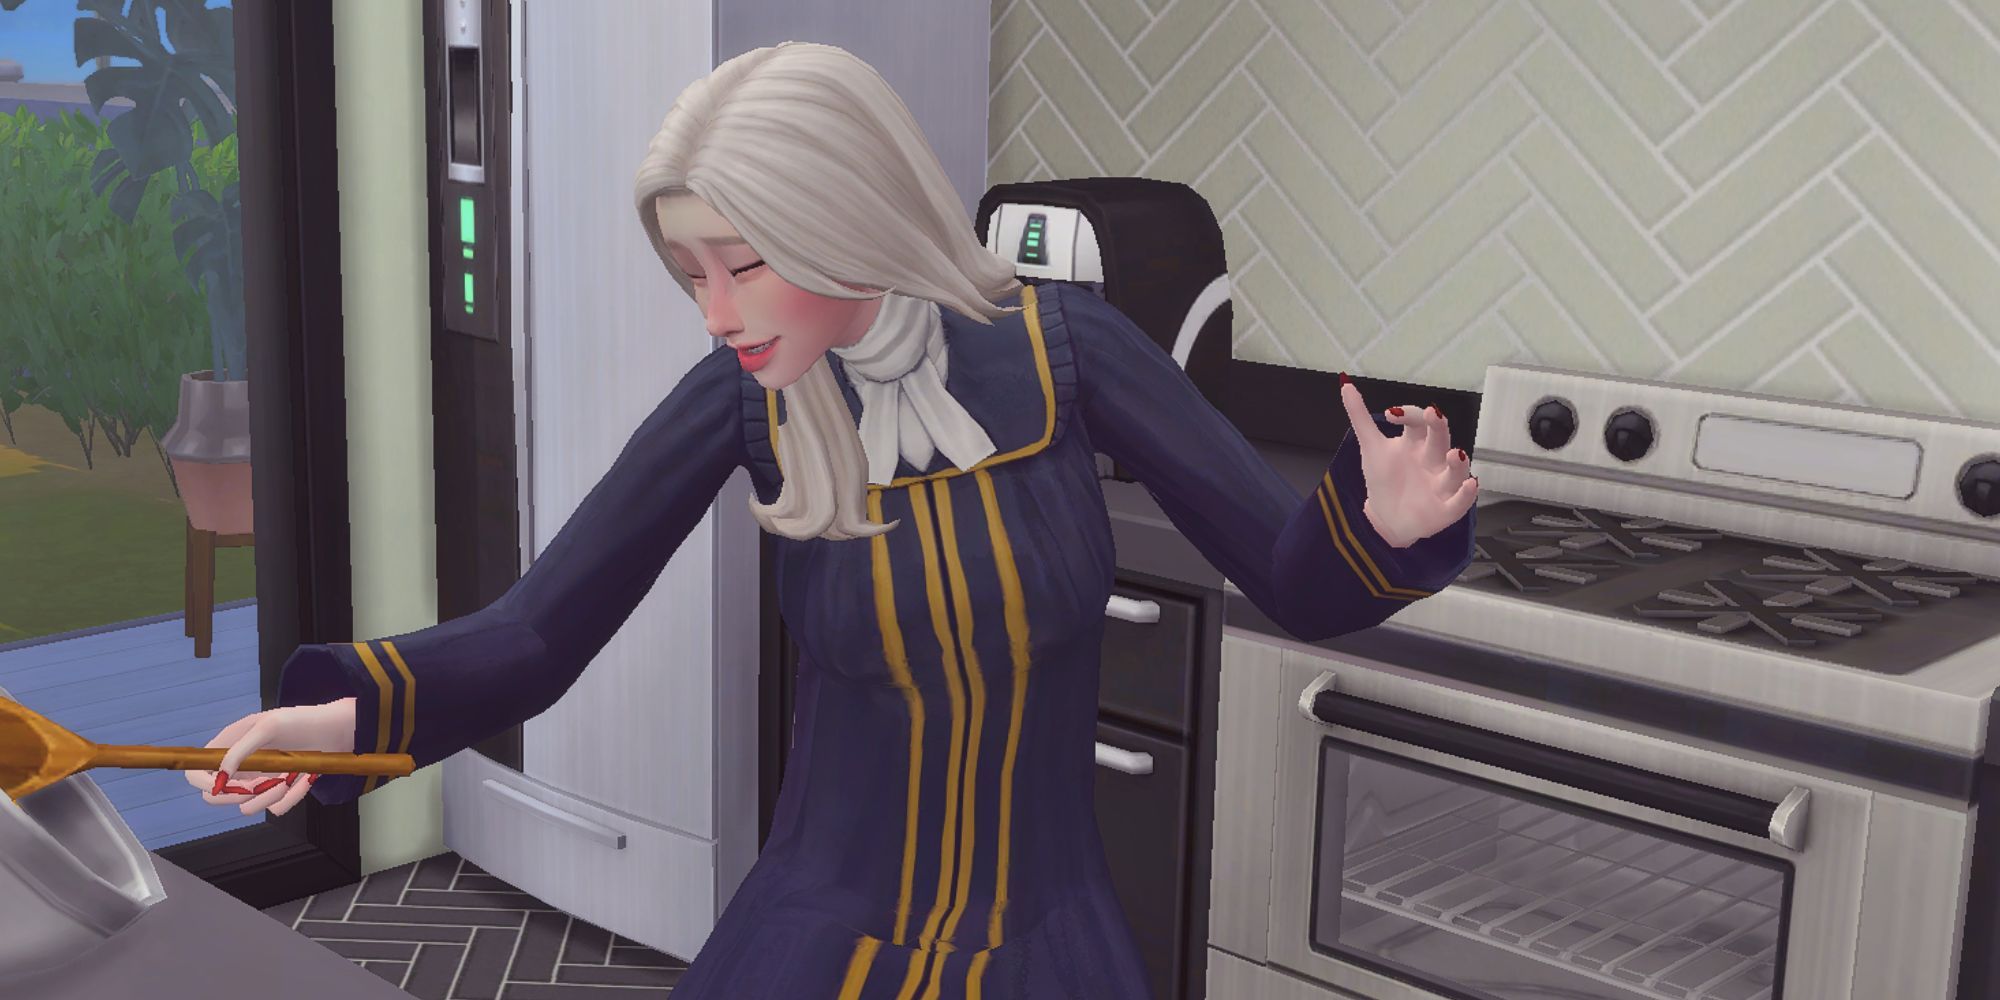 The Sims 4 Tips For Cooking Skill